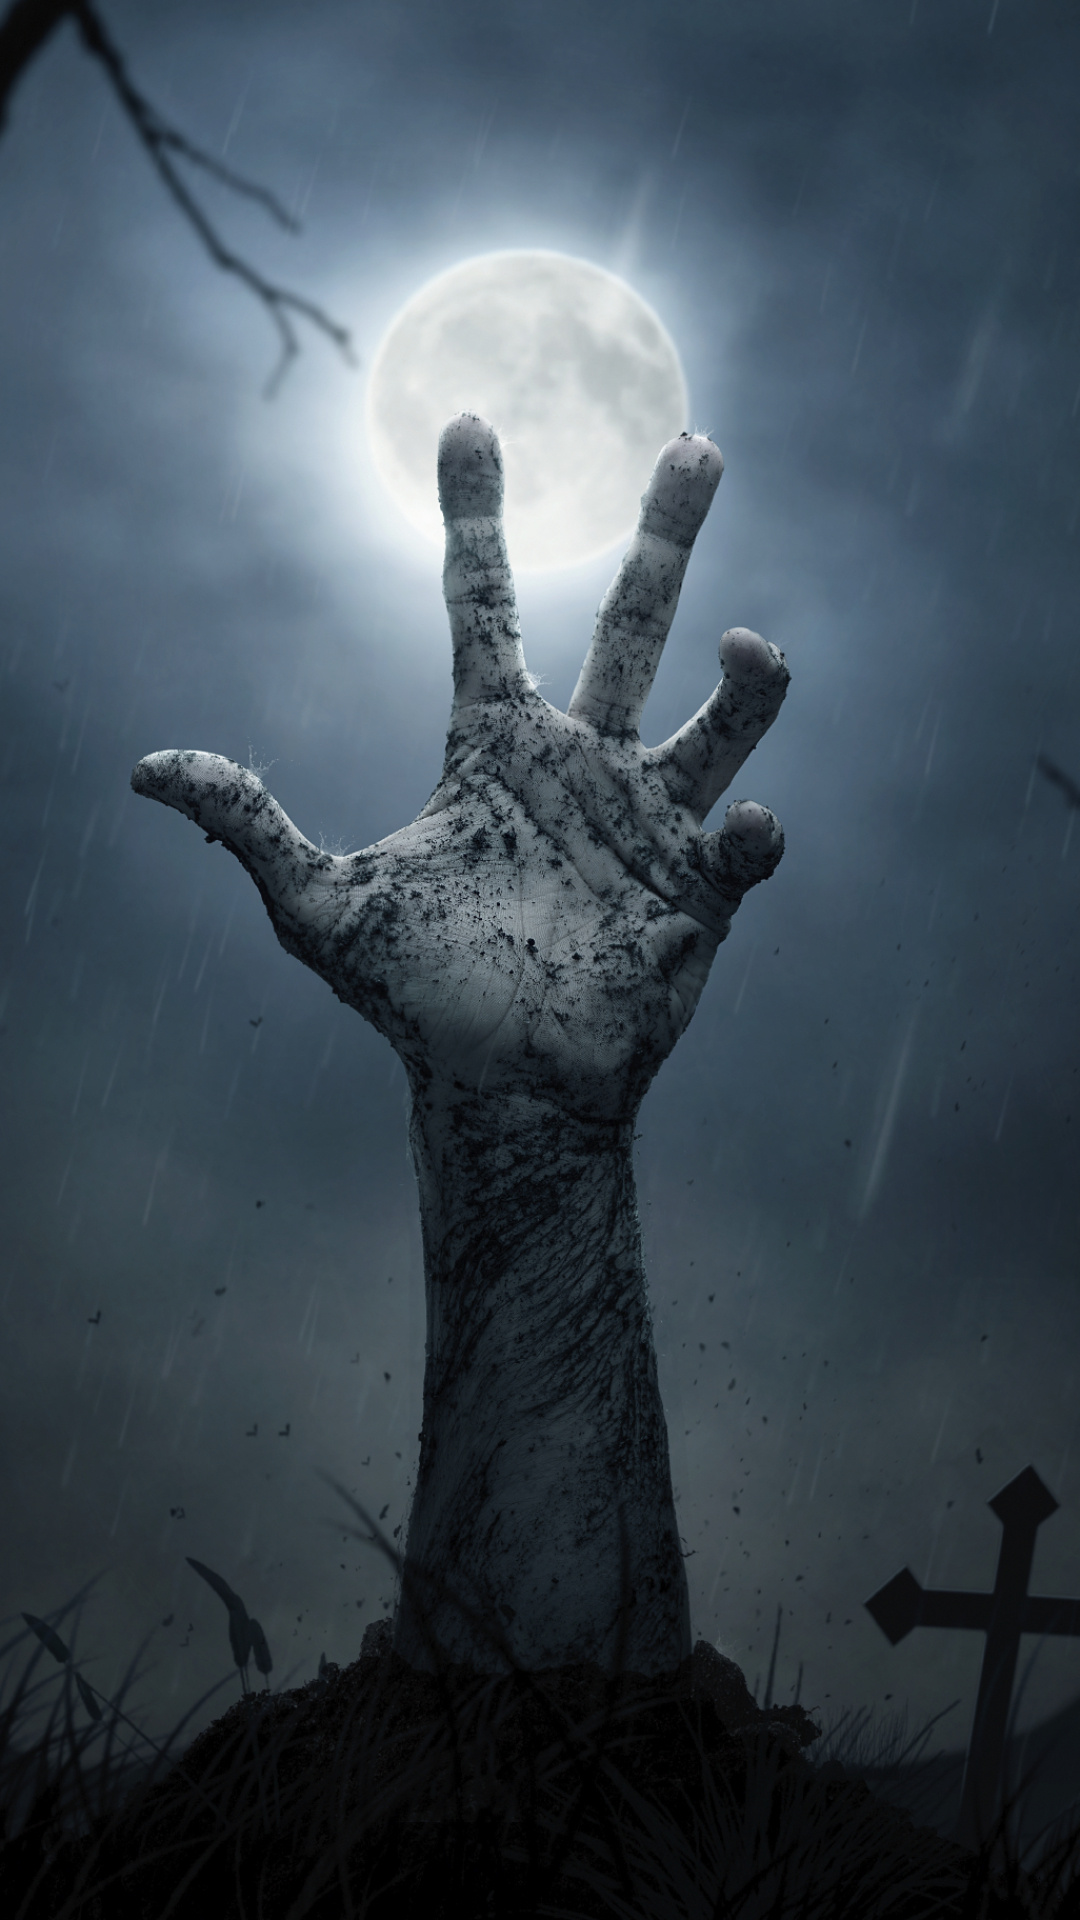 Zombie hand phone wallpaper, Dark iPhone background, Gothic vibes, Eerie mobile display, 1080x1920 Full HD Phone